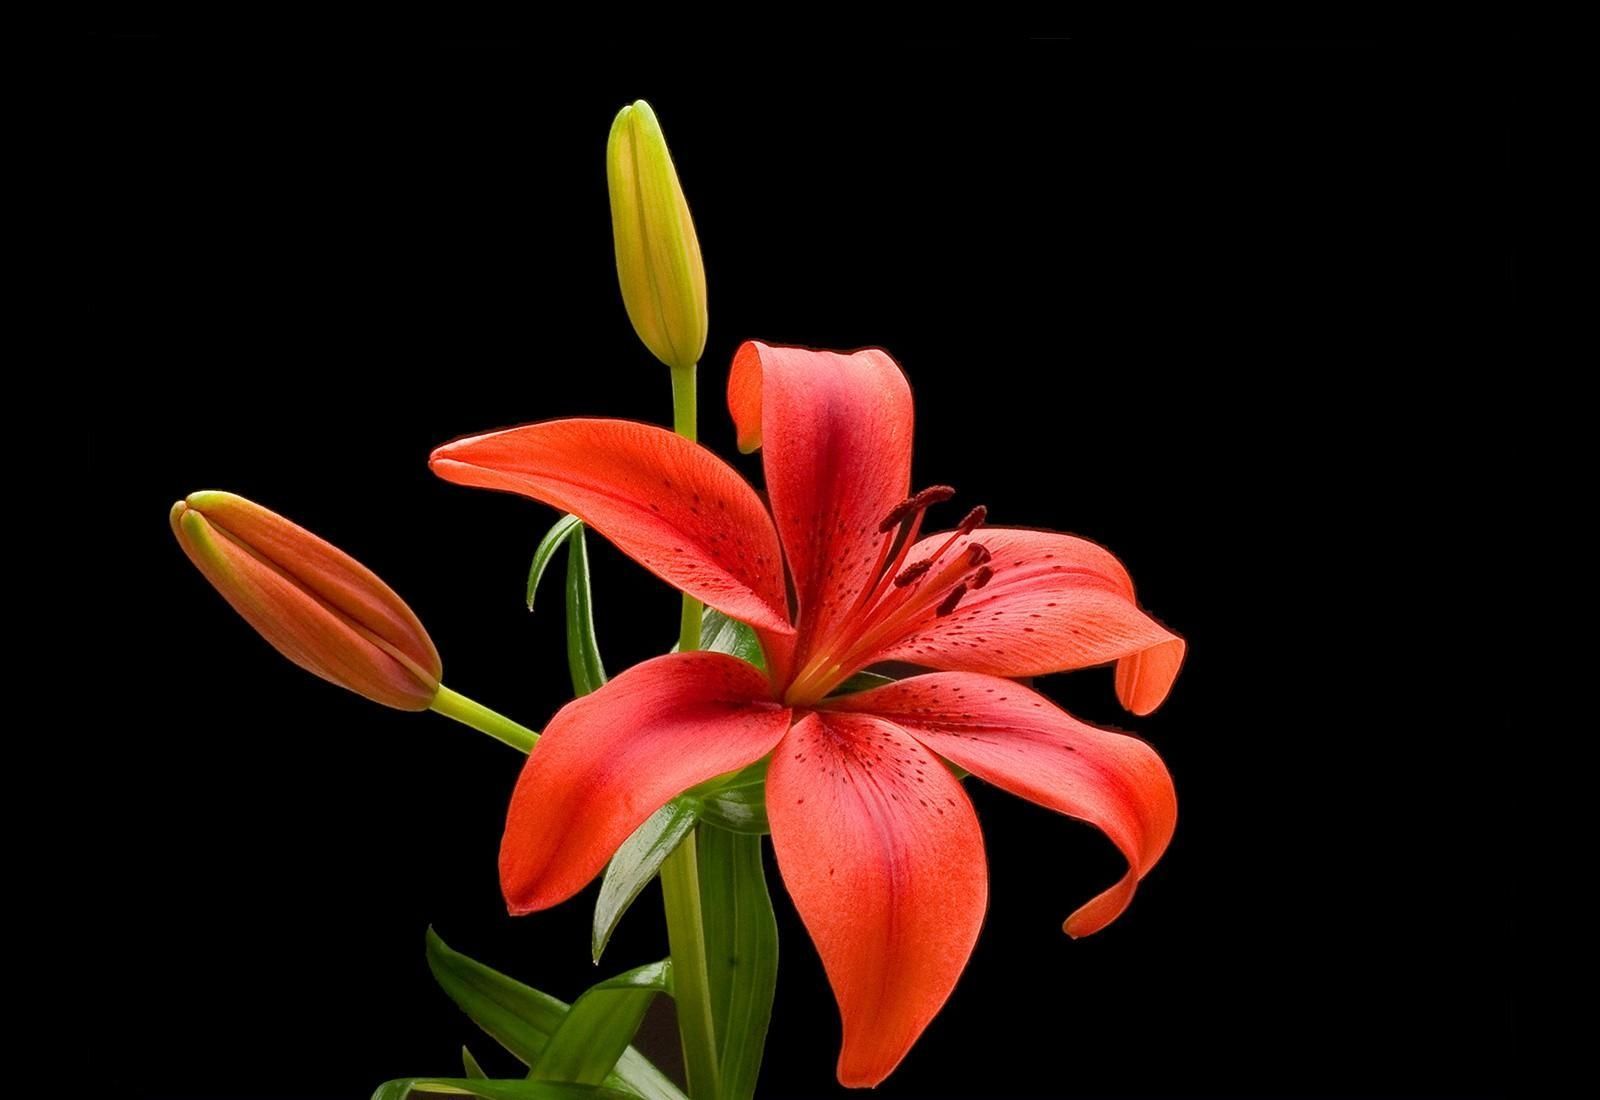 Red Lily Flower Wallpaper